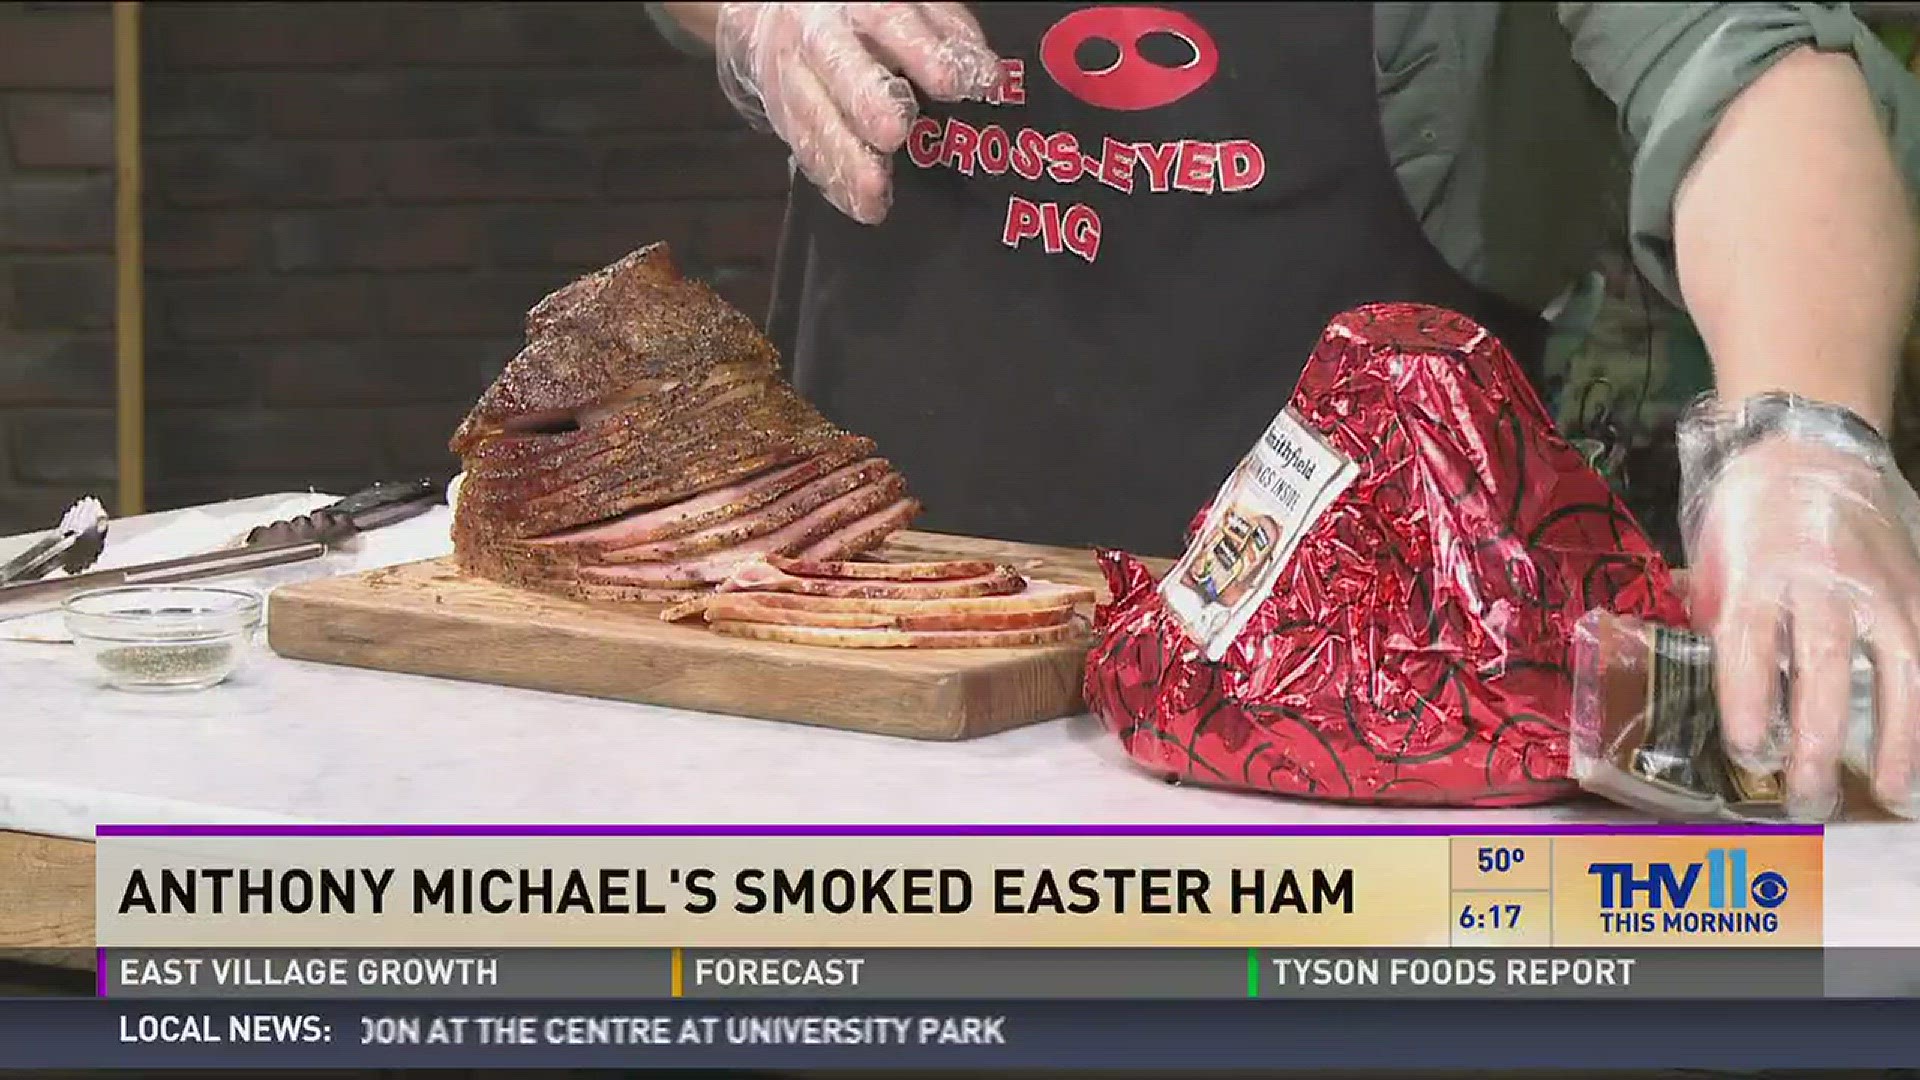 Anthony Michael from the Cross-Eyed Pig shows off his Easter ham